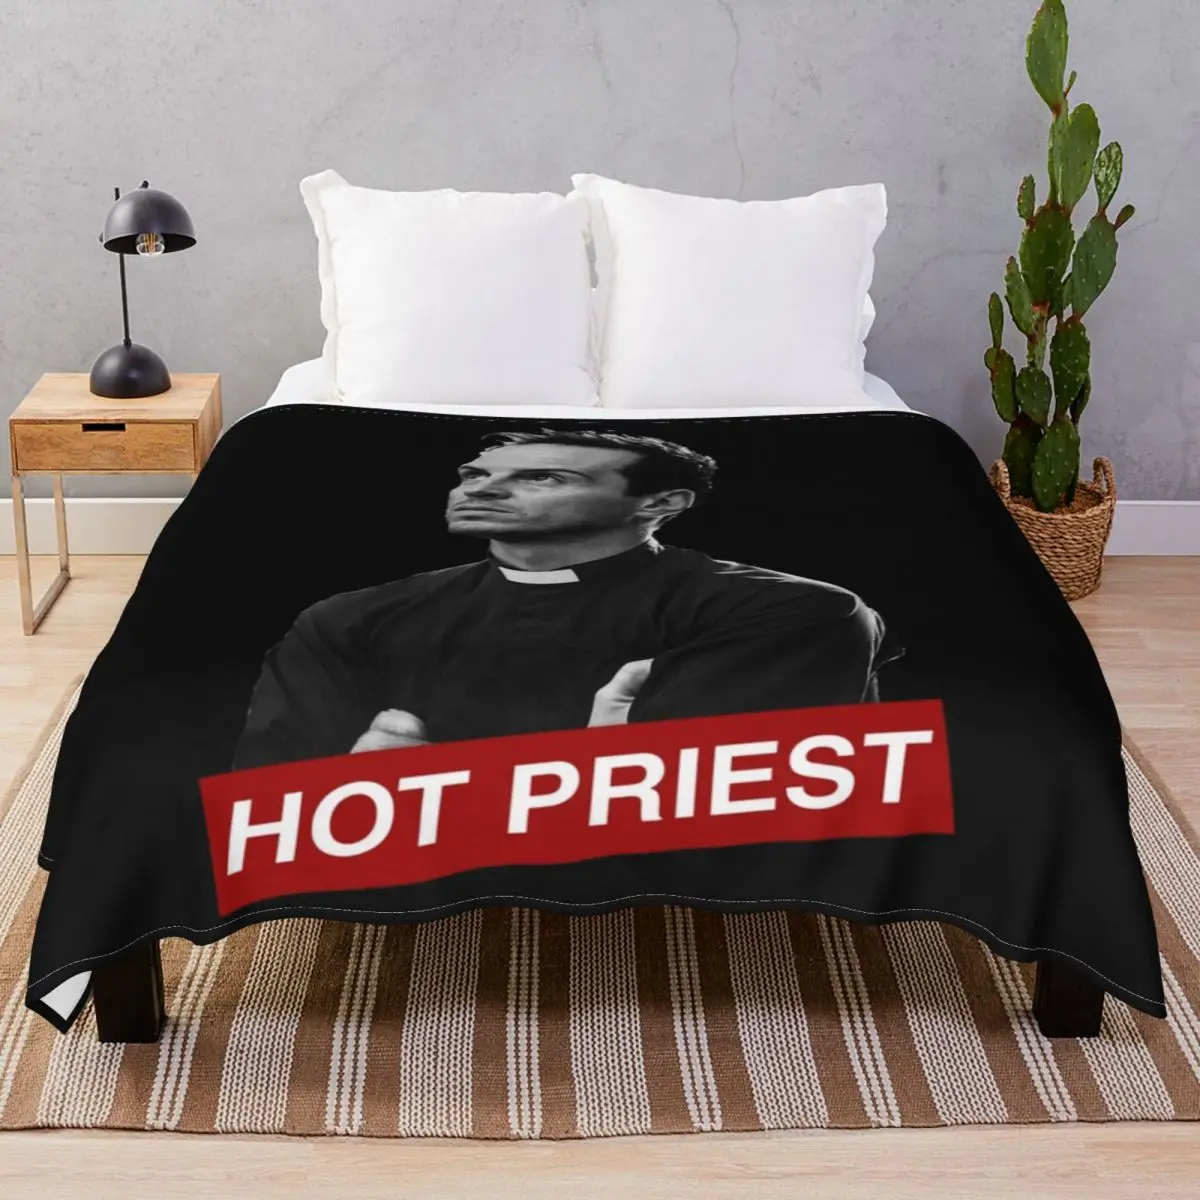 HOT PRIEST AMEN Blankets Fleece Decoration Multifunction Unisex Throw Blanket for Bed Home Couch Travel Office